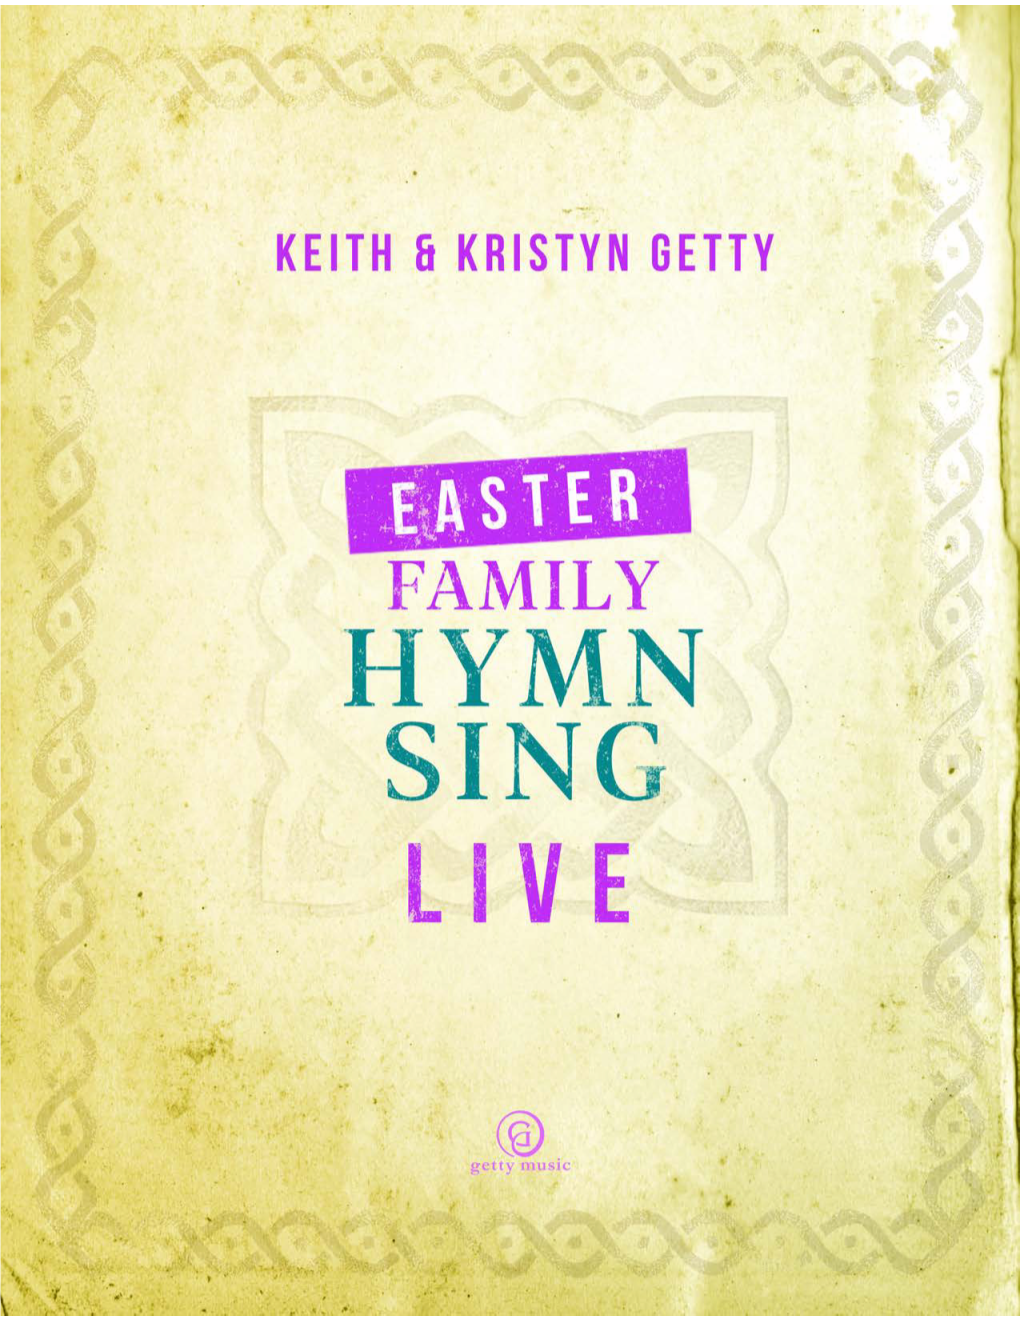 Easter Family Hymn Sing with Keith & Kristyn Getty